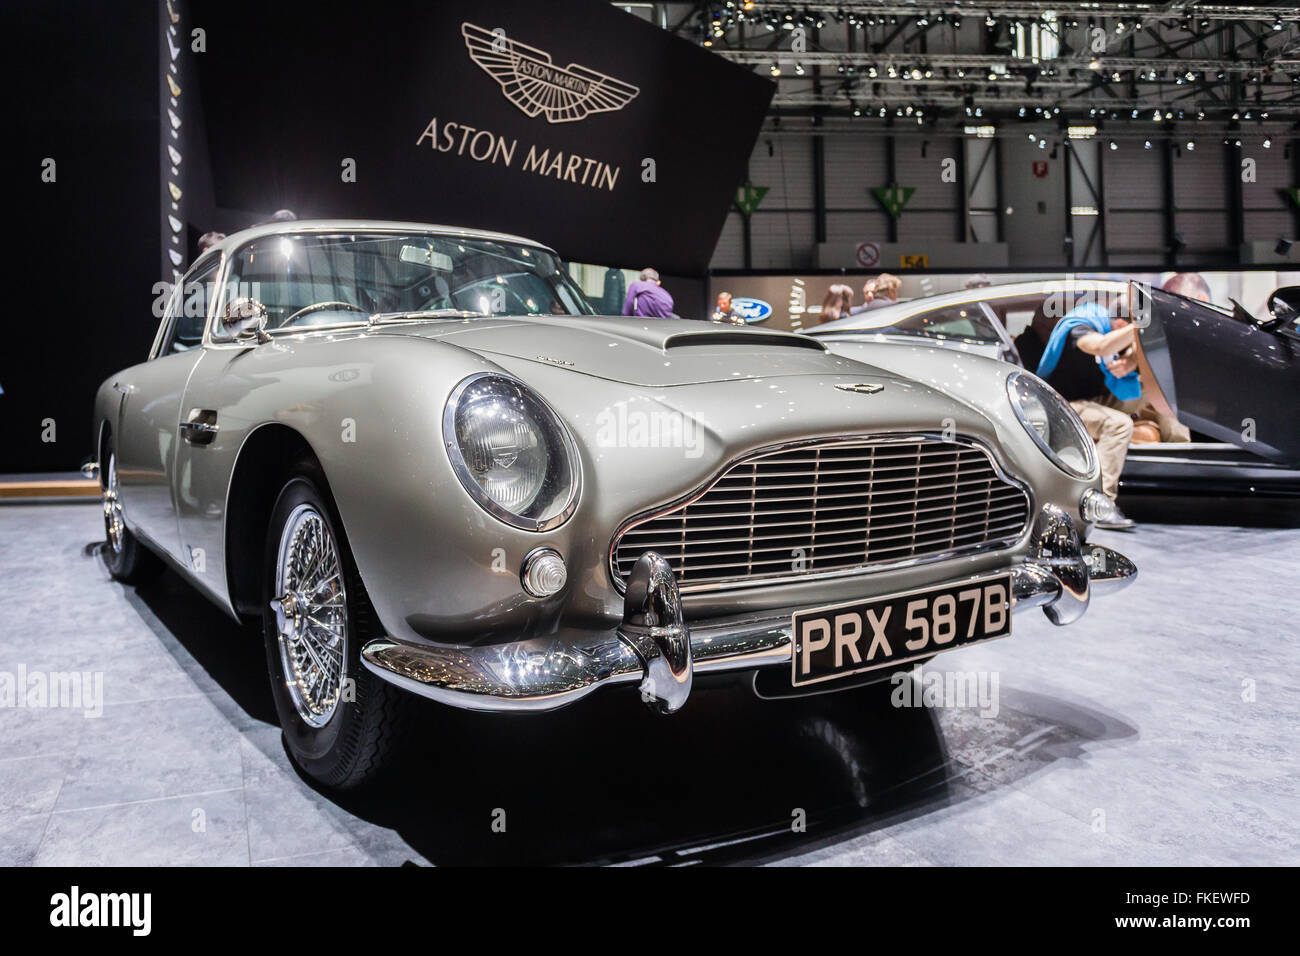 The James Bond car an Aston Martin DB5 in exhibition at the 2016 Motor Show  in Palexpo Geneva in Switzerland Stock Photo - Alamy